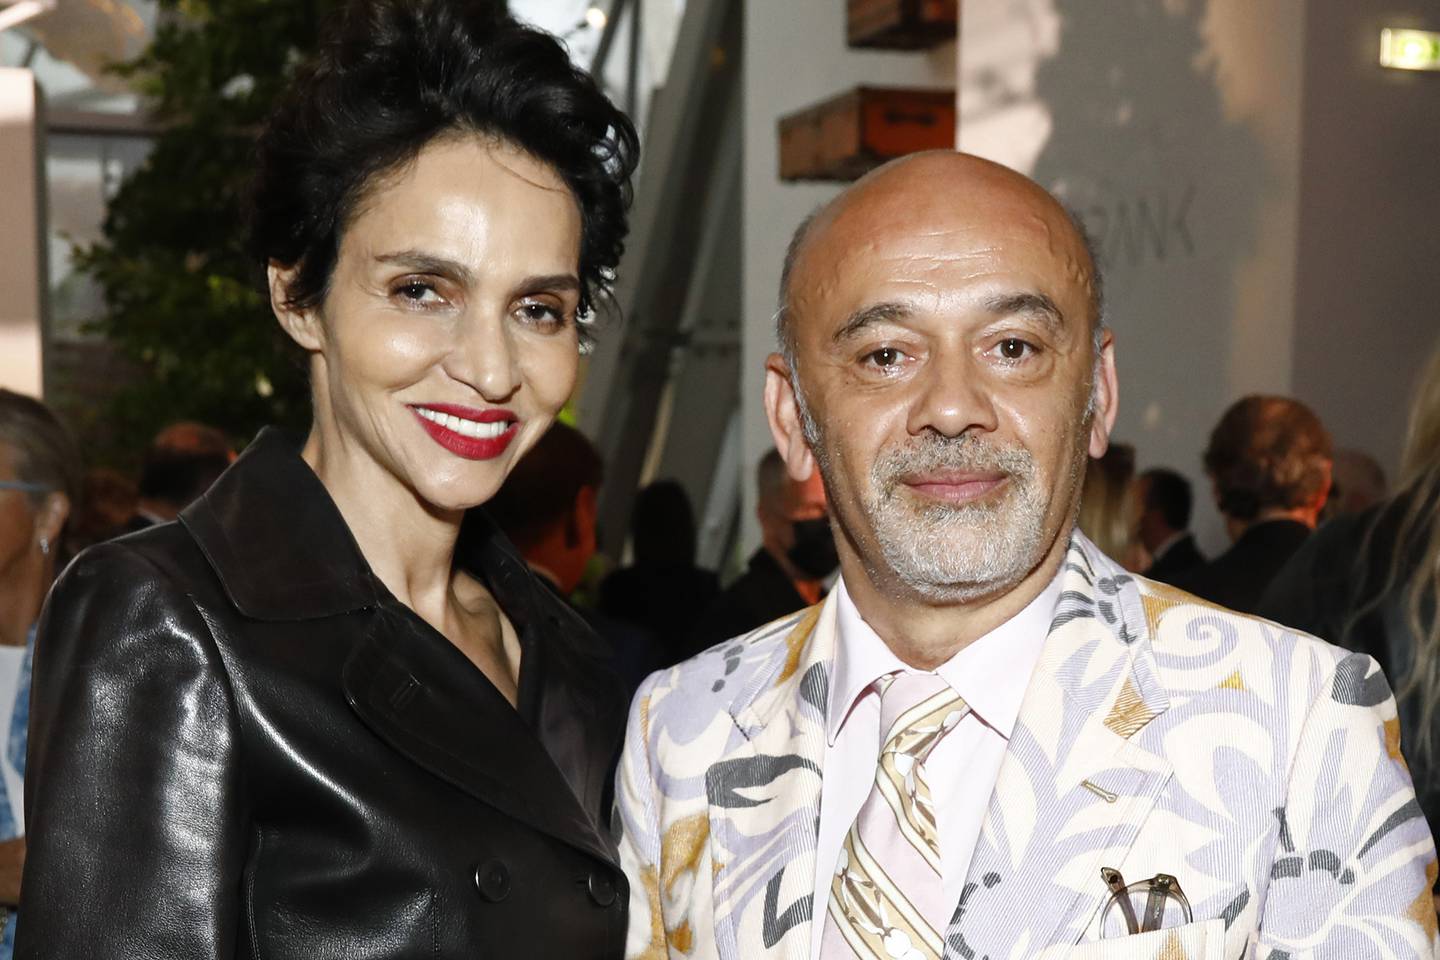 Farida Khelfa and Christian Louboutin at the Louis Vuitton Parfum Dinner in July in Paris. Getty Images 